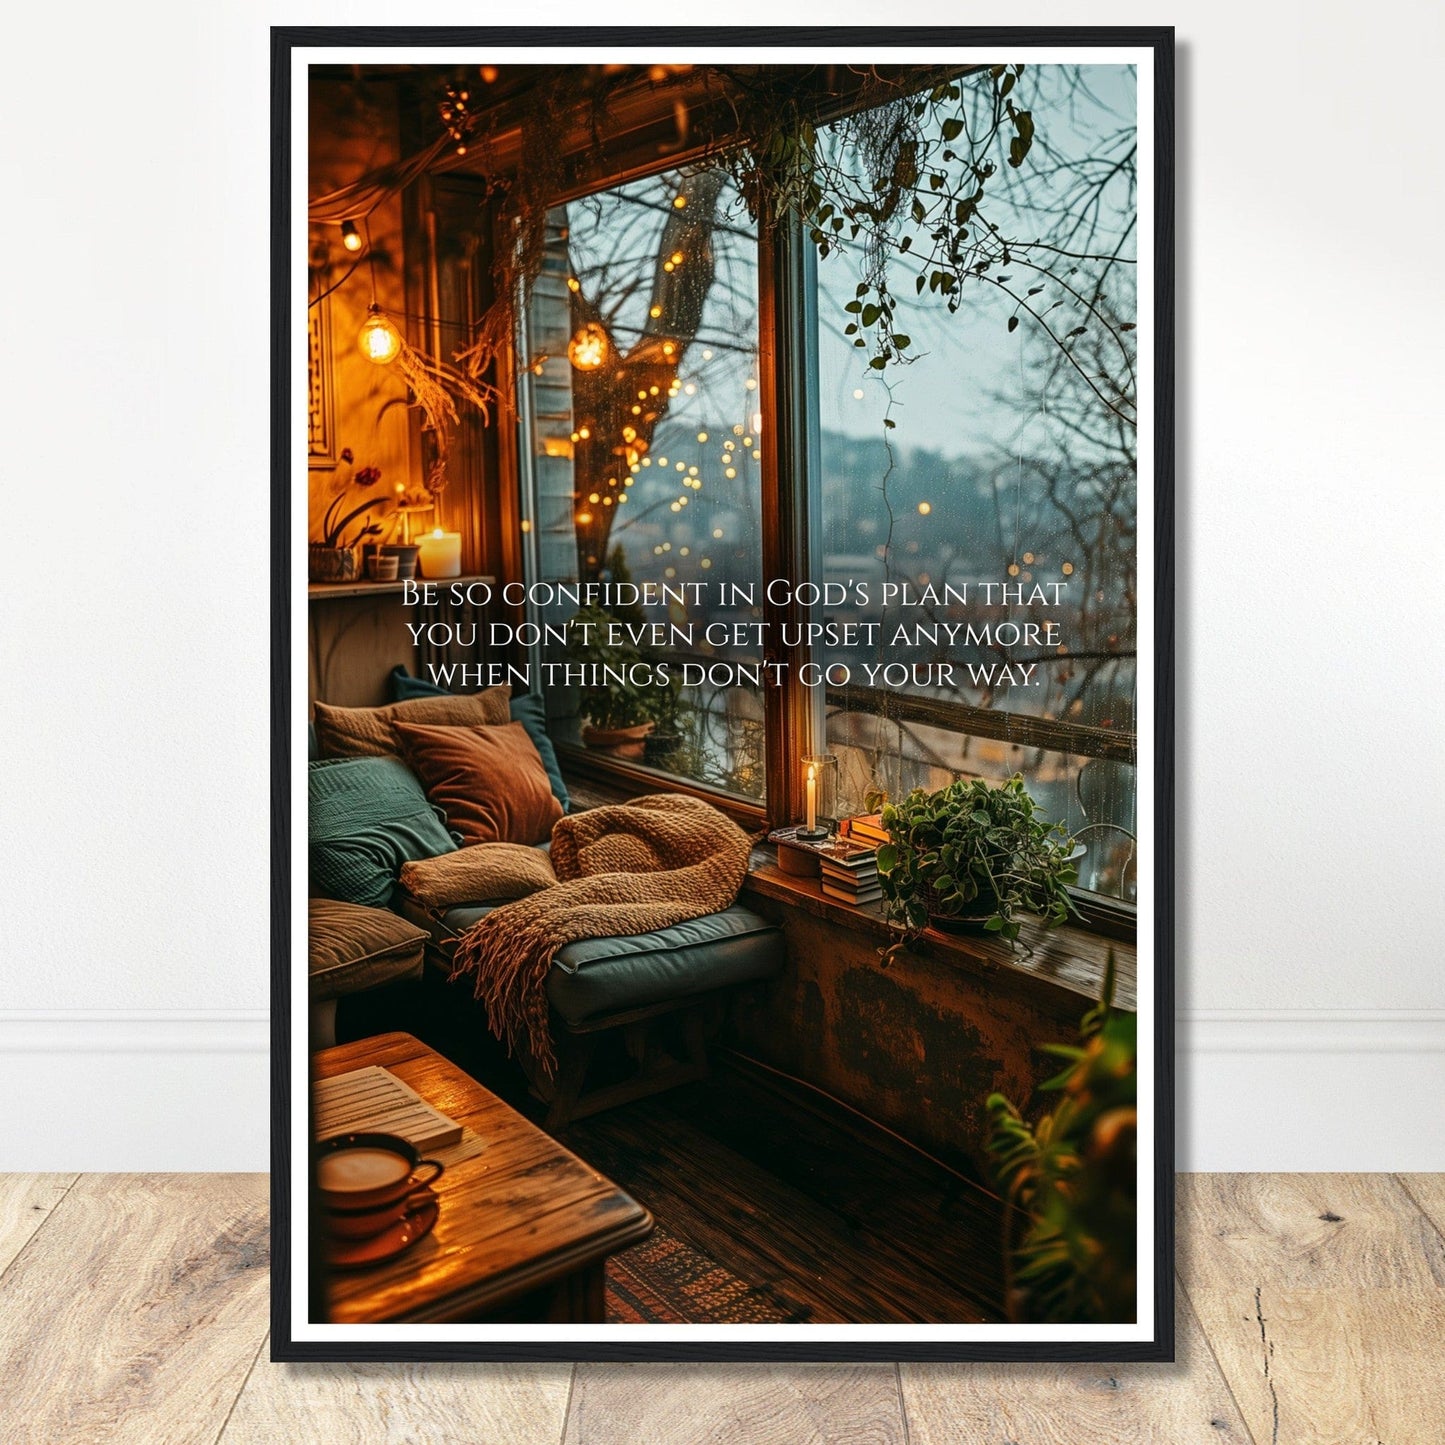 Coffee With My Father Print Material 60x90 cm / 24x36″ / Premium Matte Paper Wooden Framed Poster / Black frame Premium Matte Paper Wooden Framed Poster